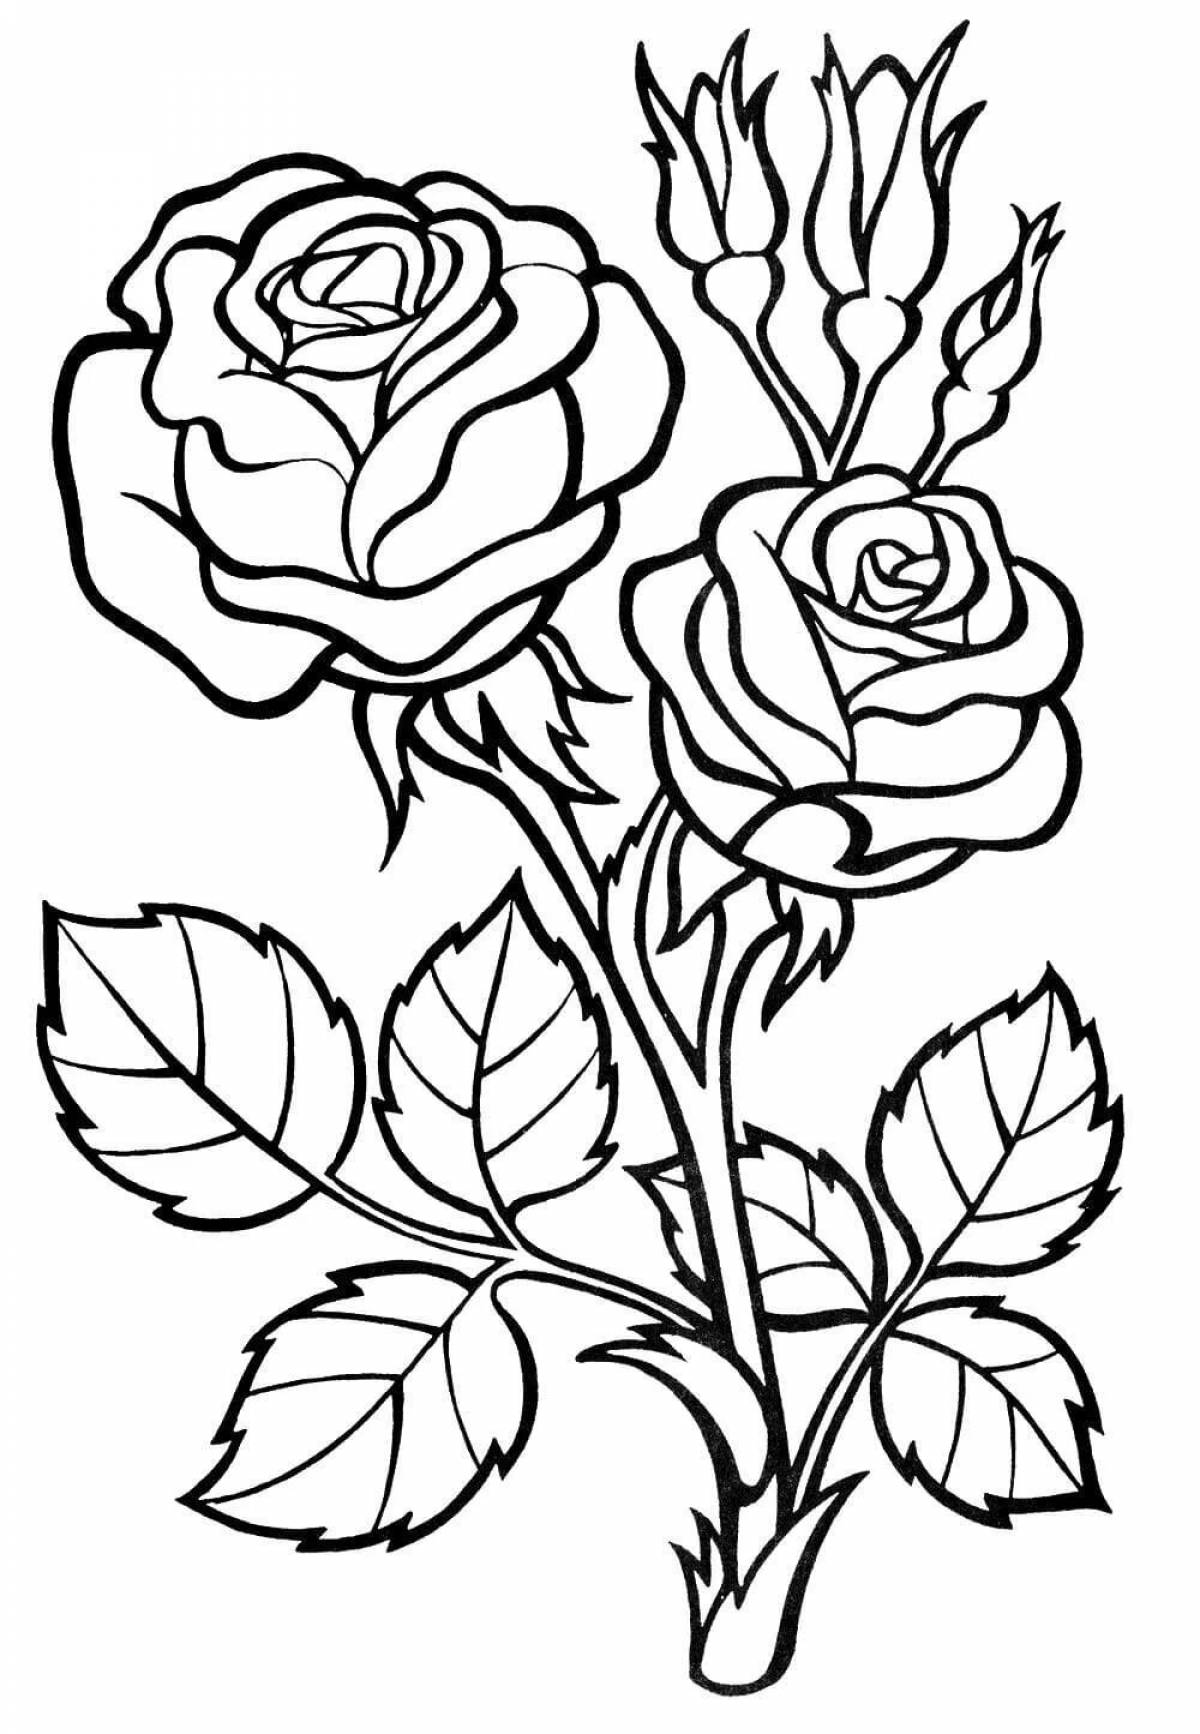 Sweet flower coloring for girls